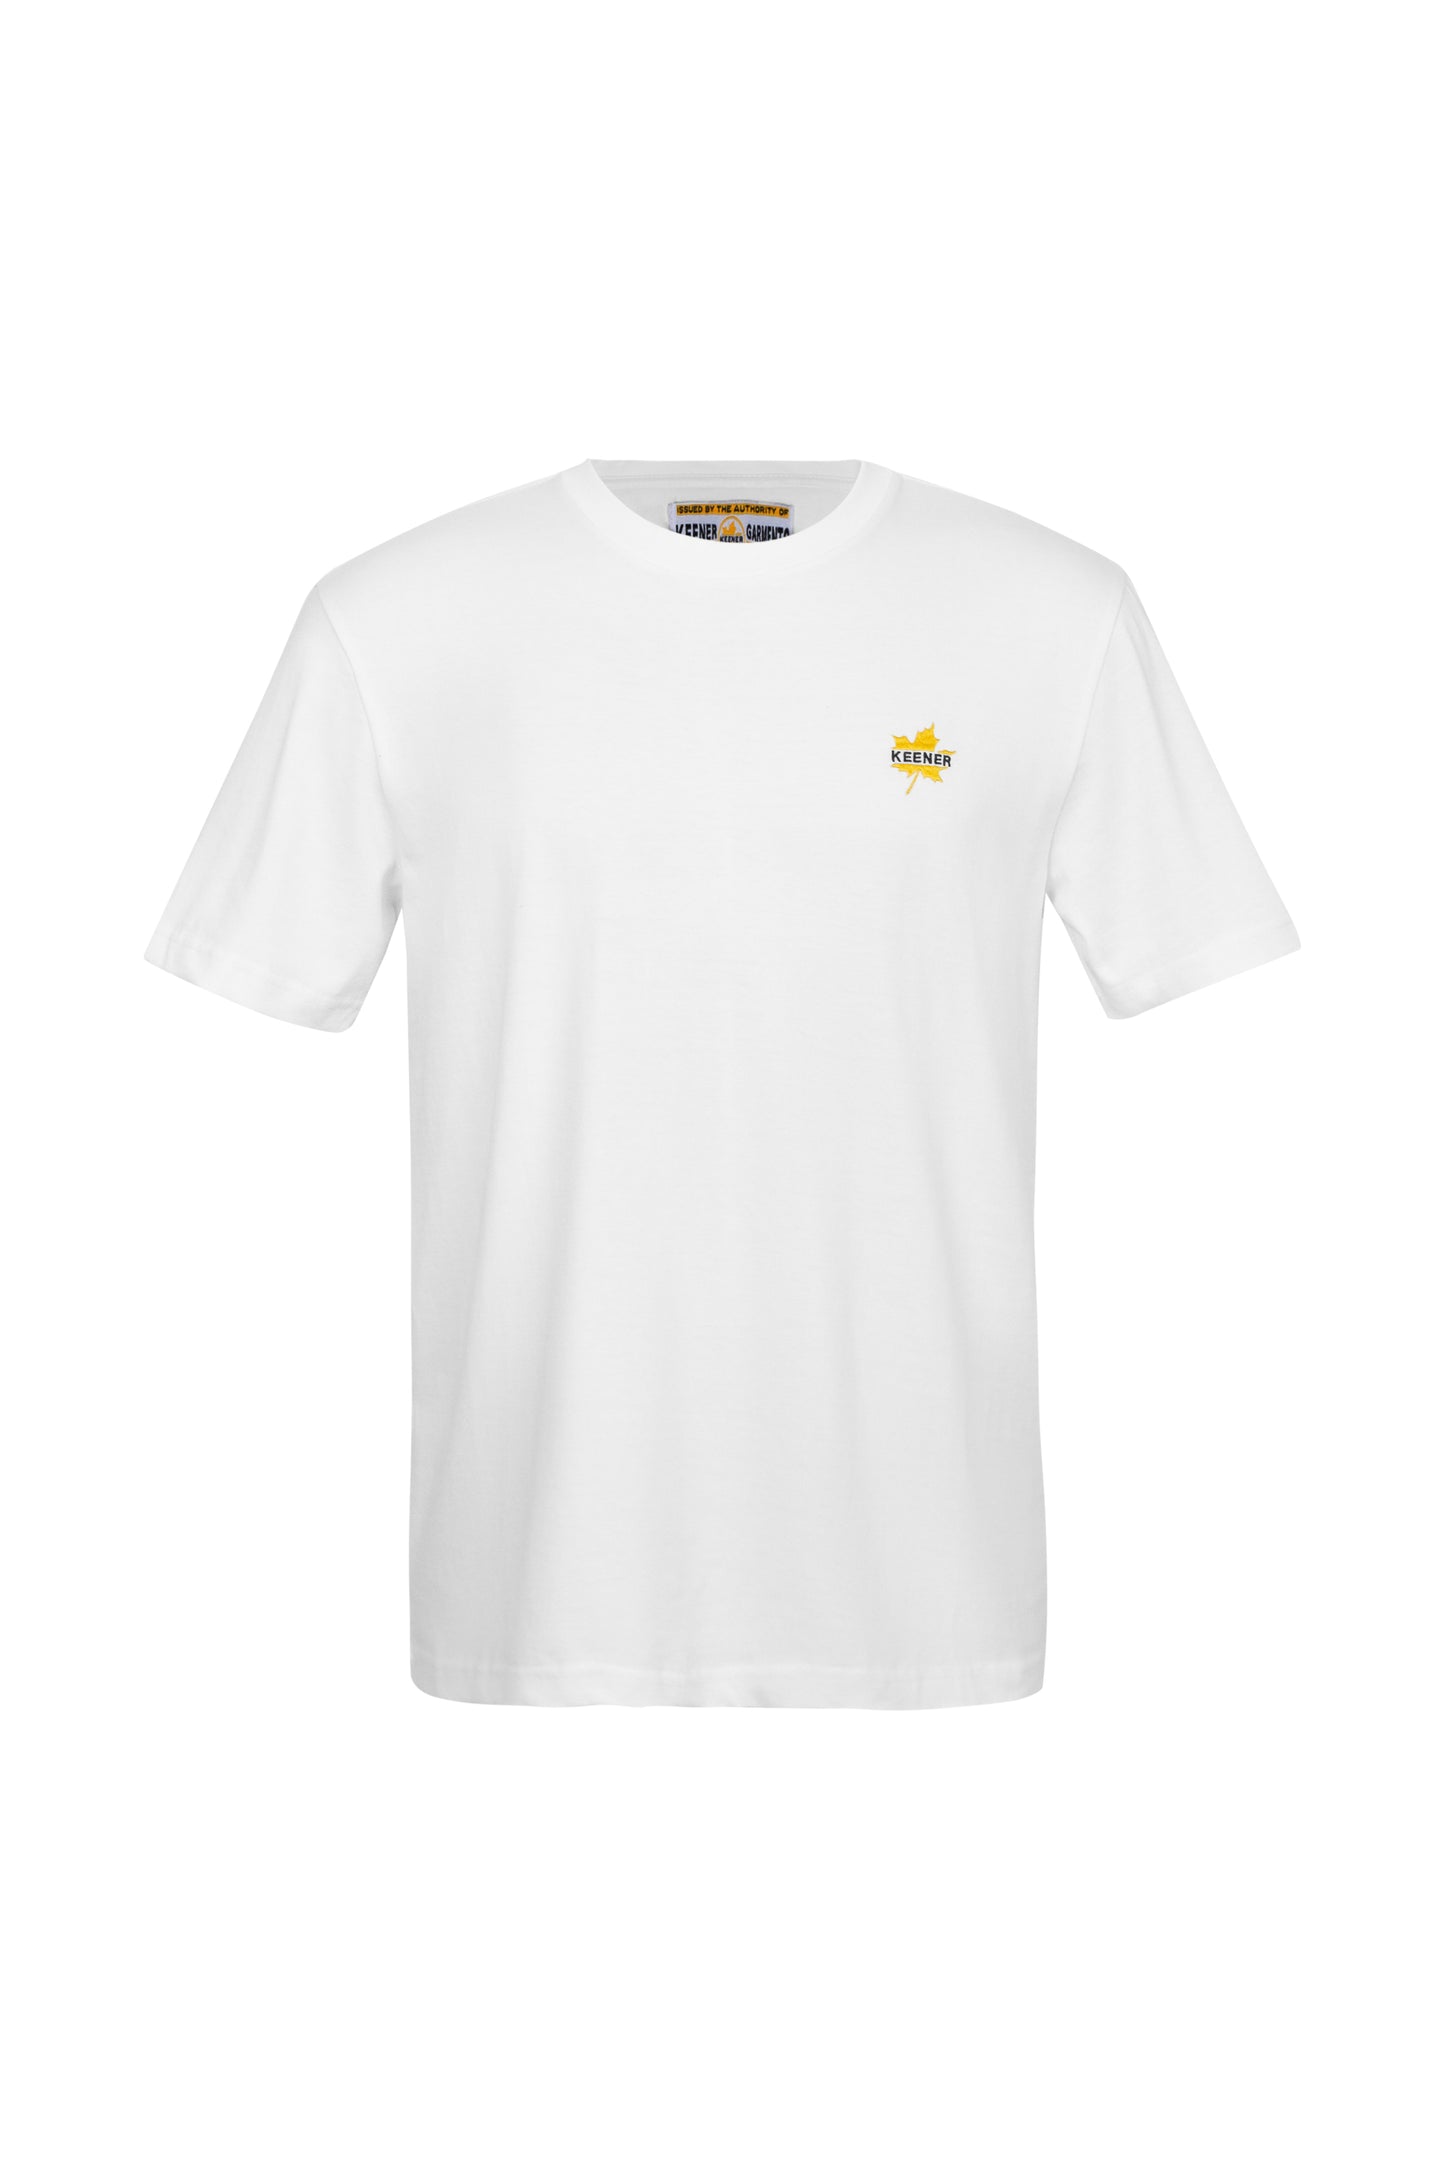 Logo t - Classic White - front